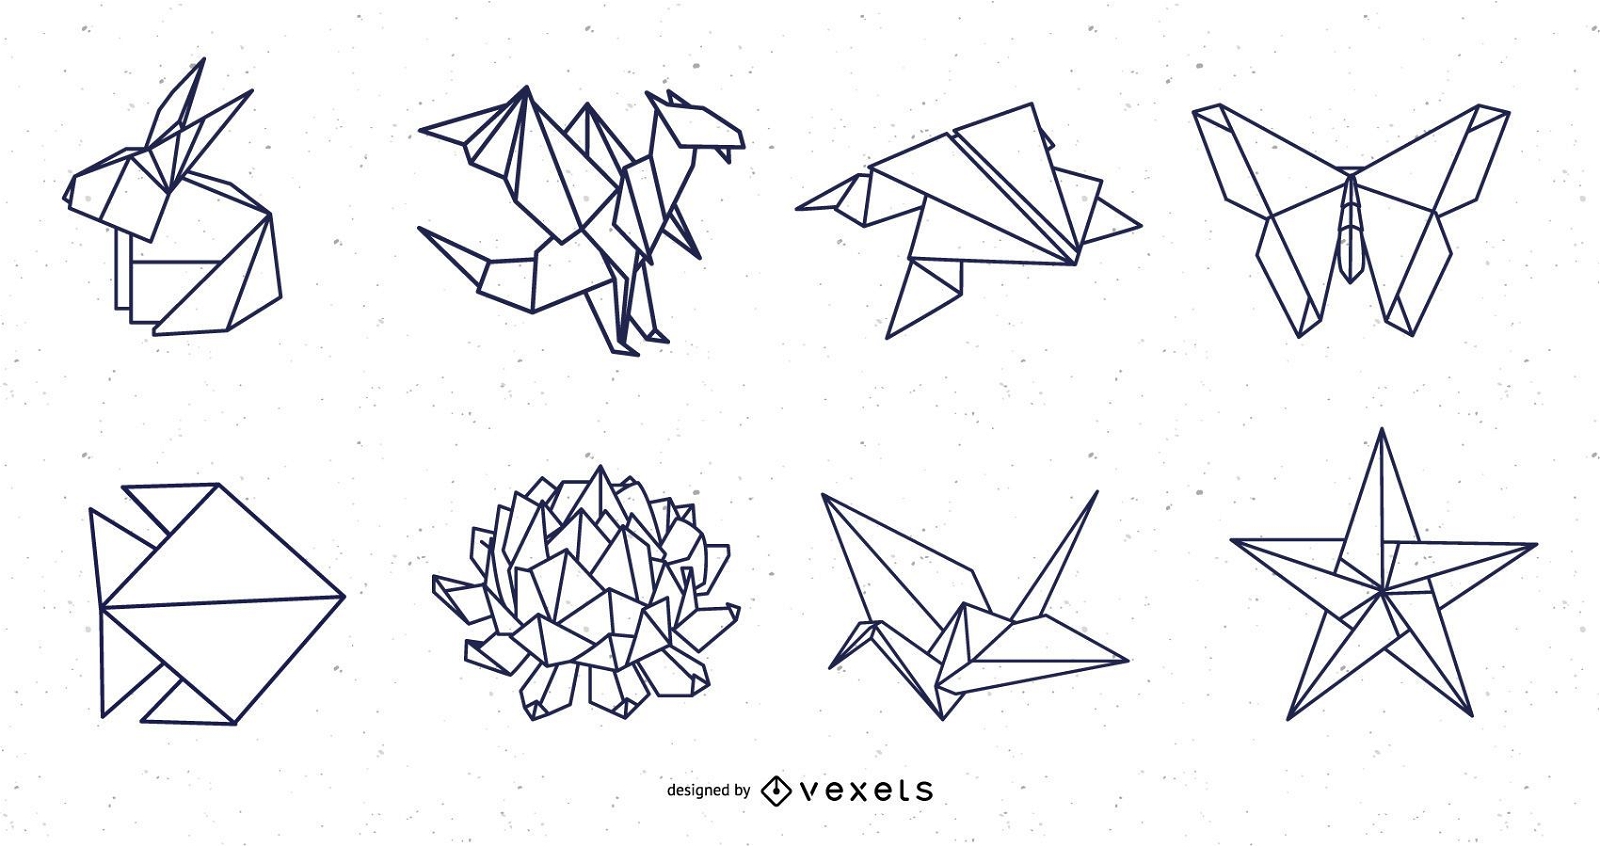 Origami nature and animals stroke design pack